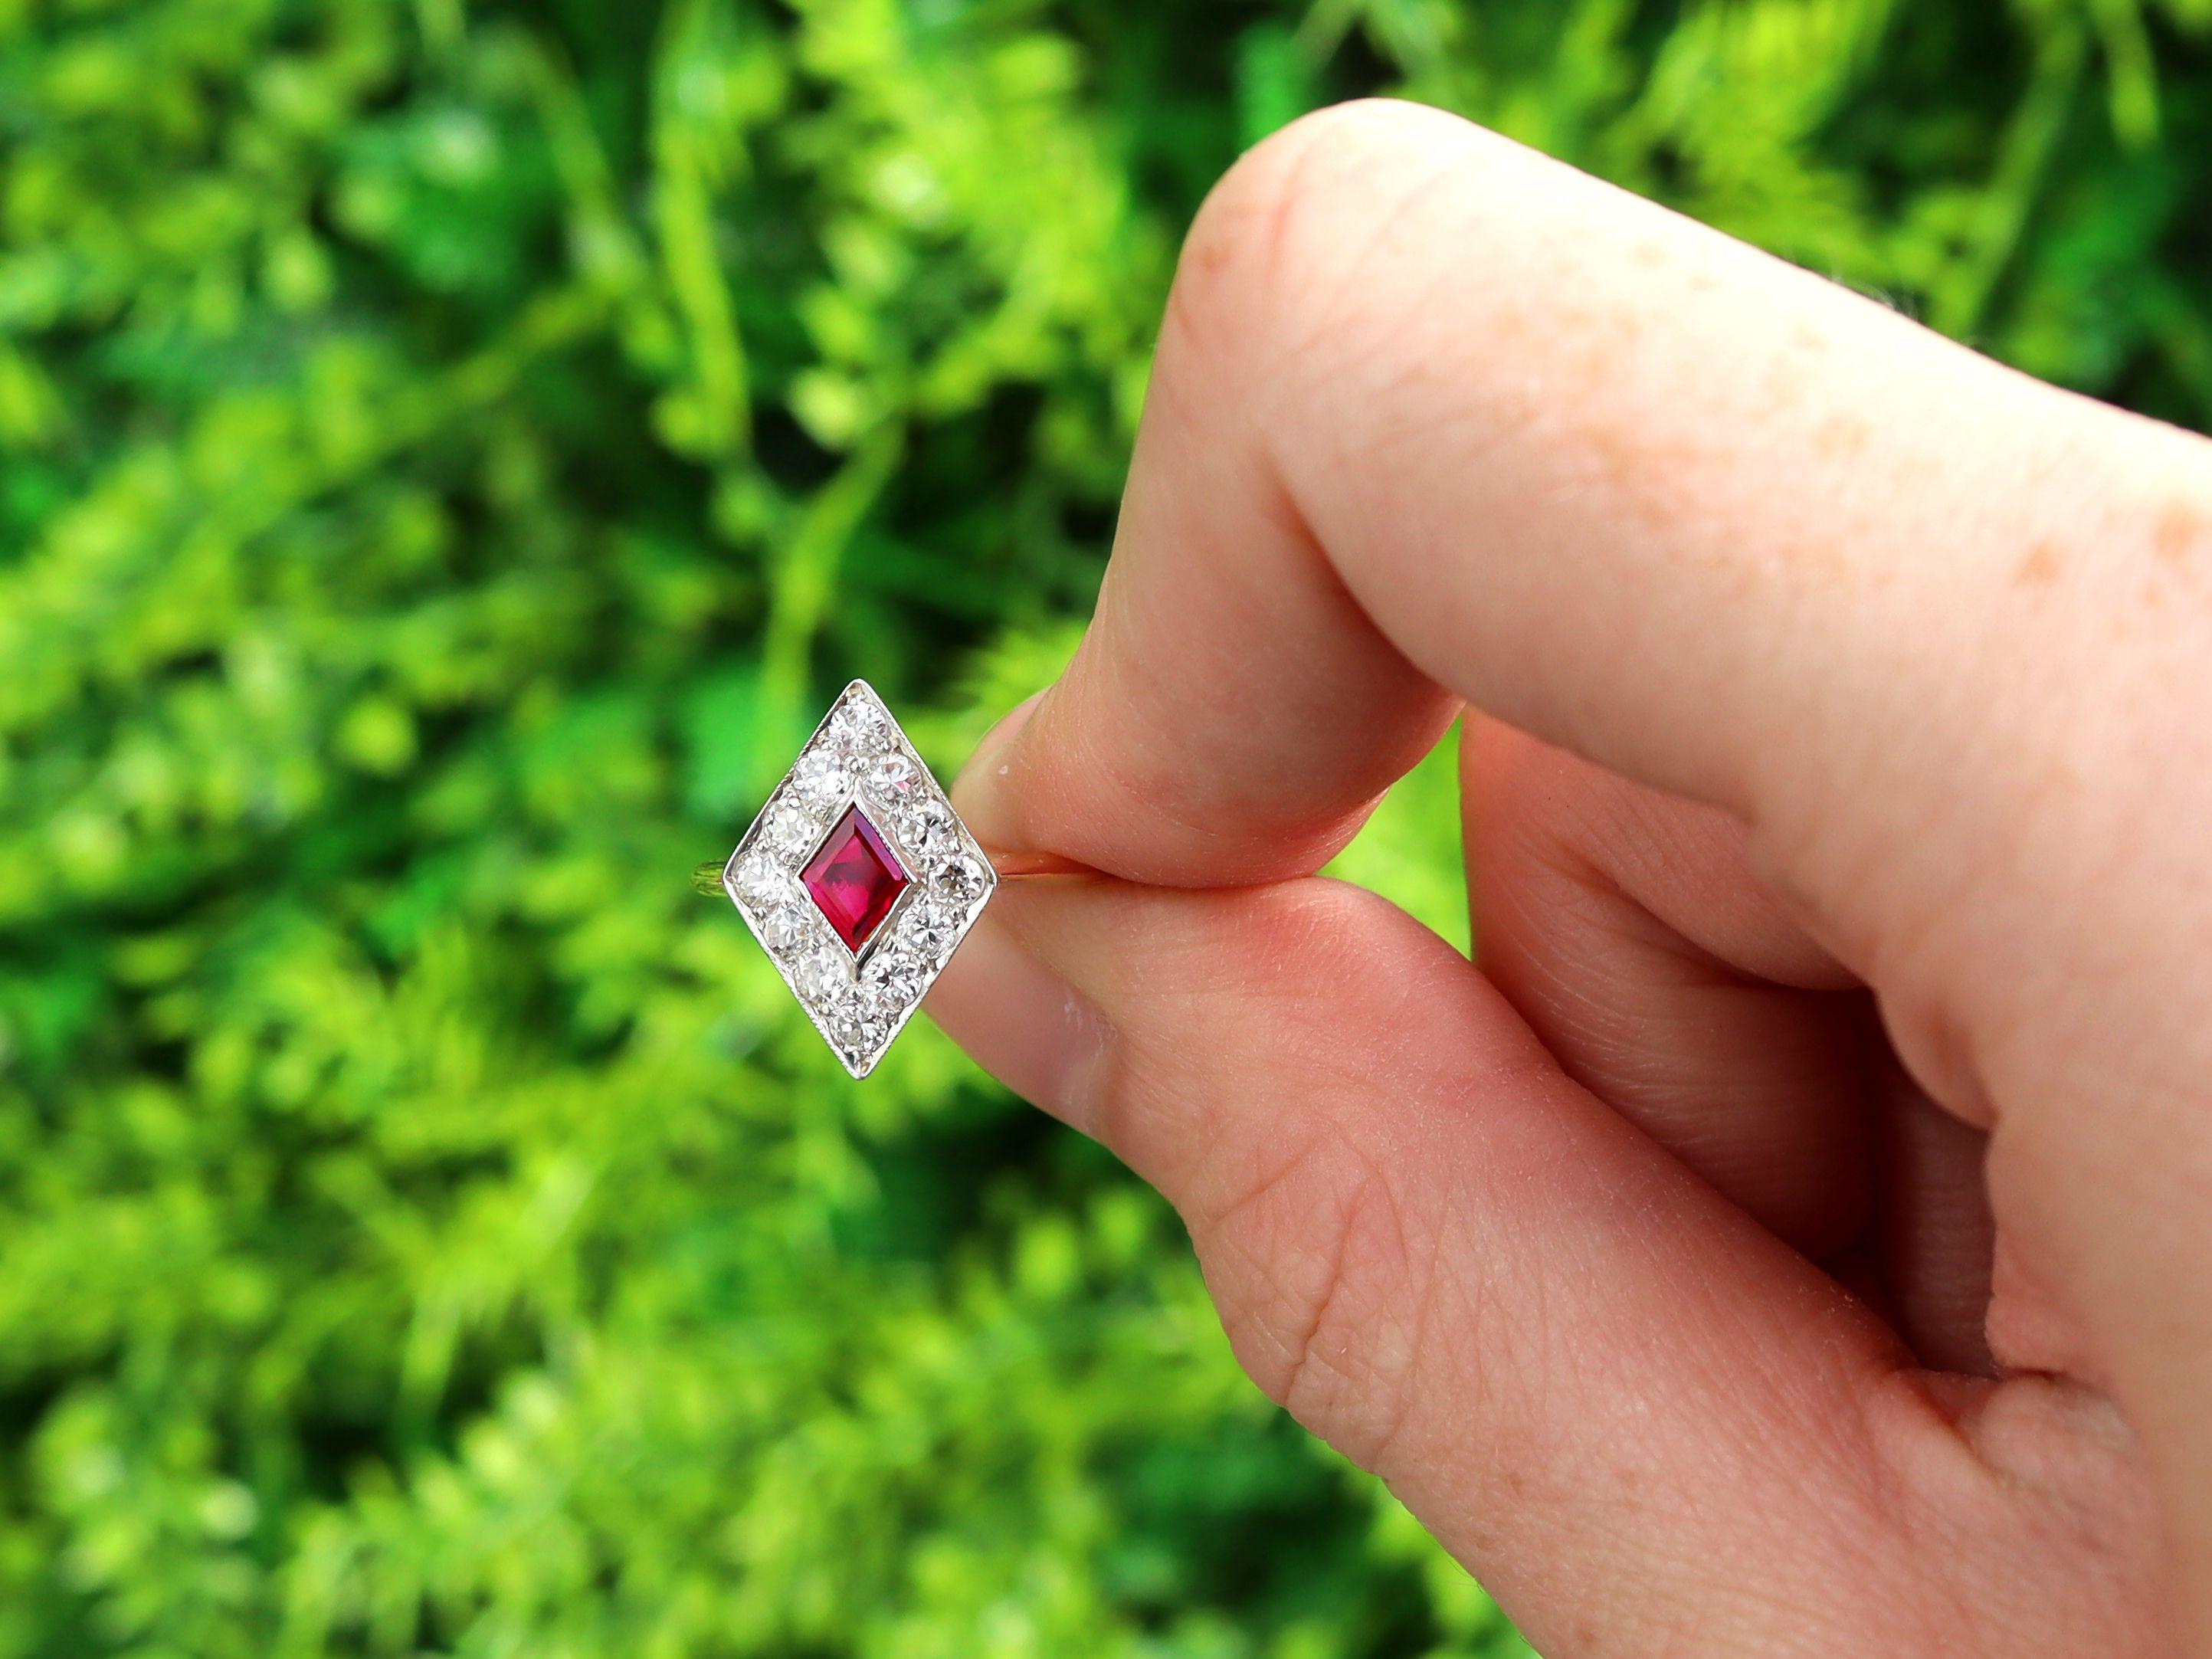 A fine and impressive 0.39 carat ruby and 0.63 carat diamond, 15 karat yellow gold and silver set kite shaped dress ring; part of our diverse antique jewelry and jewelry collections.

This fine and impressive antique ruby and diamond ring has been